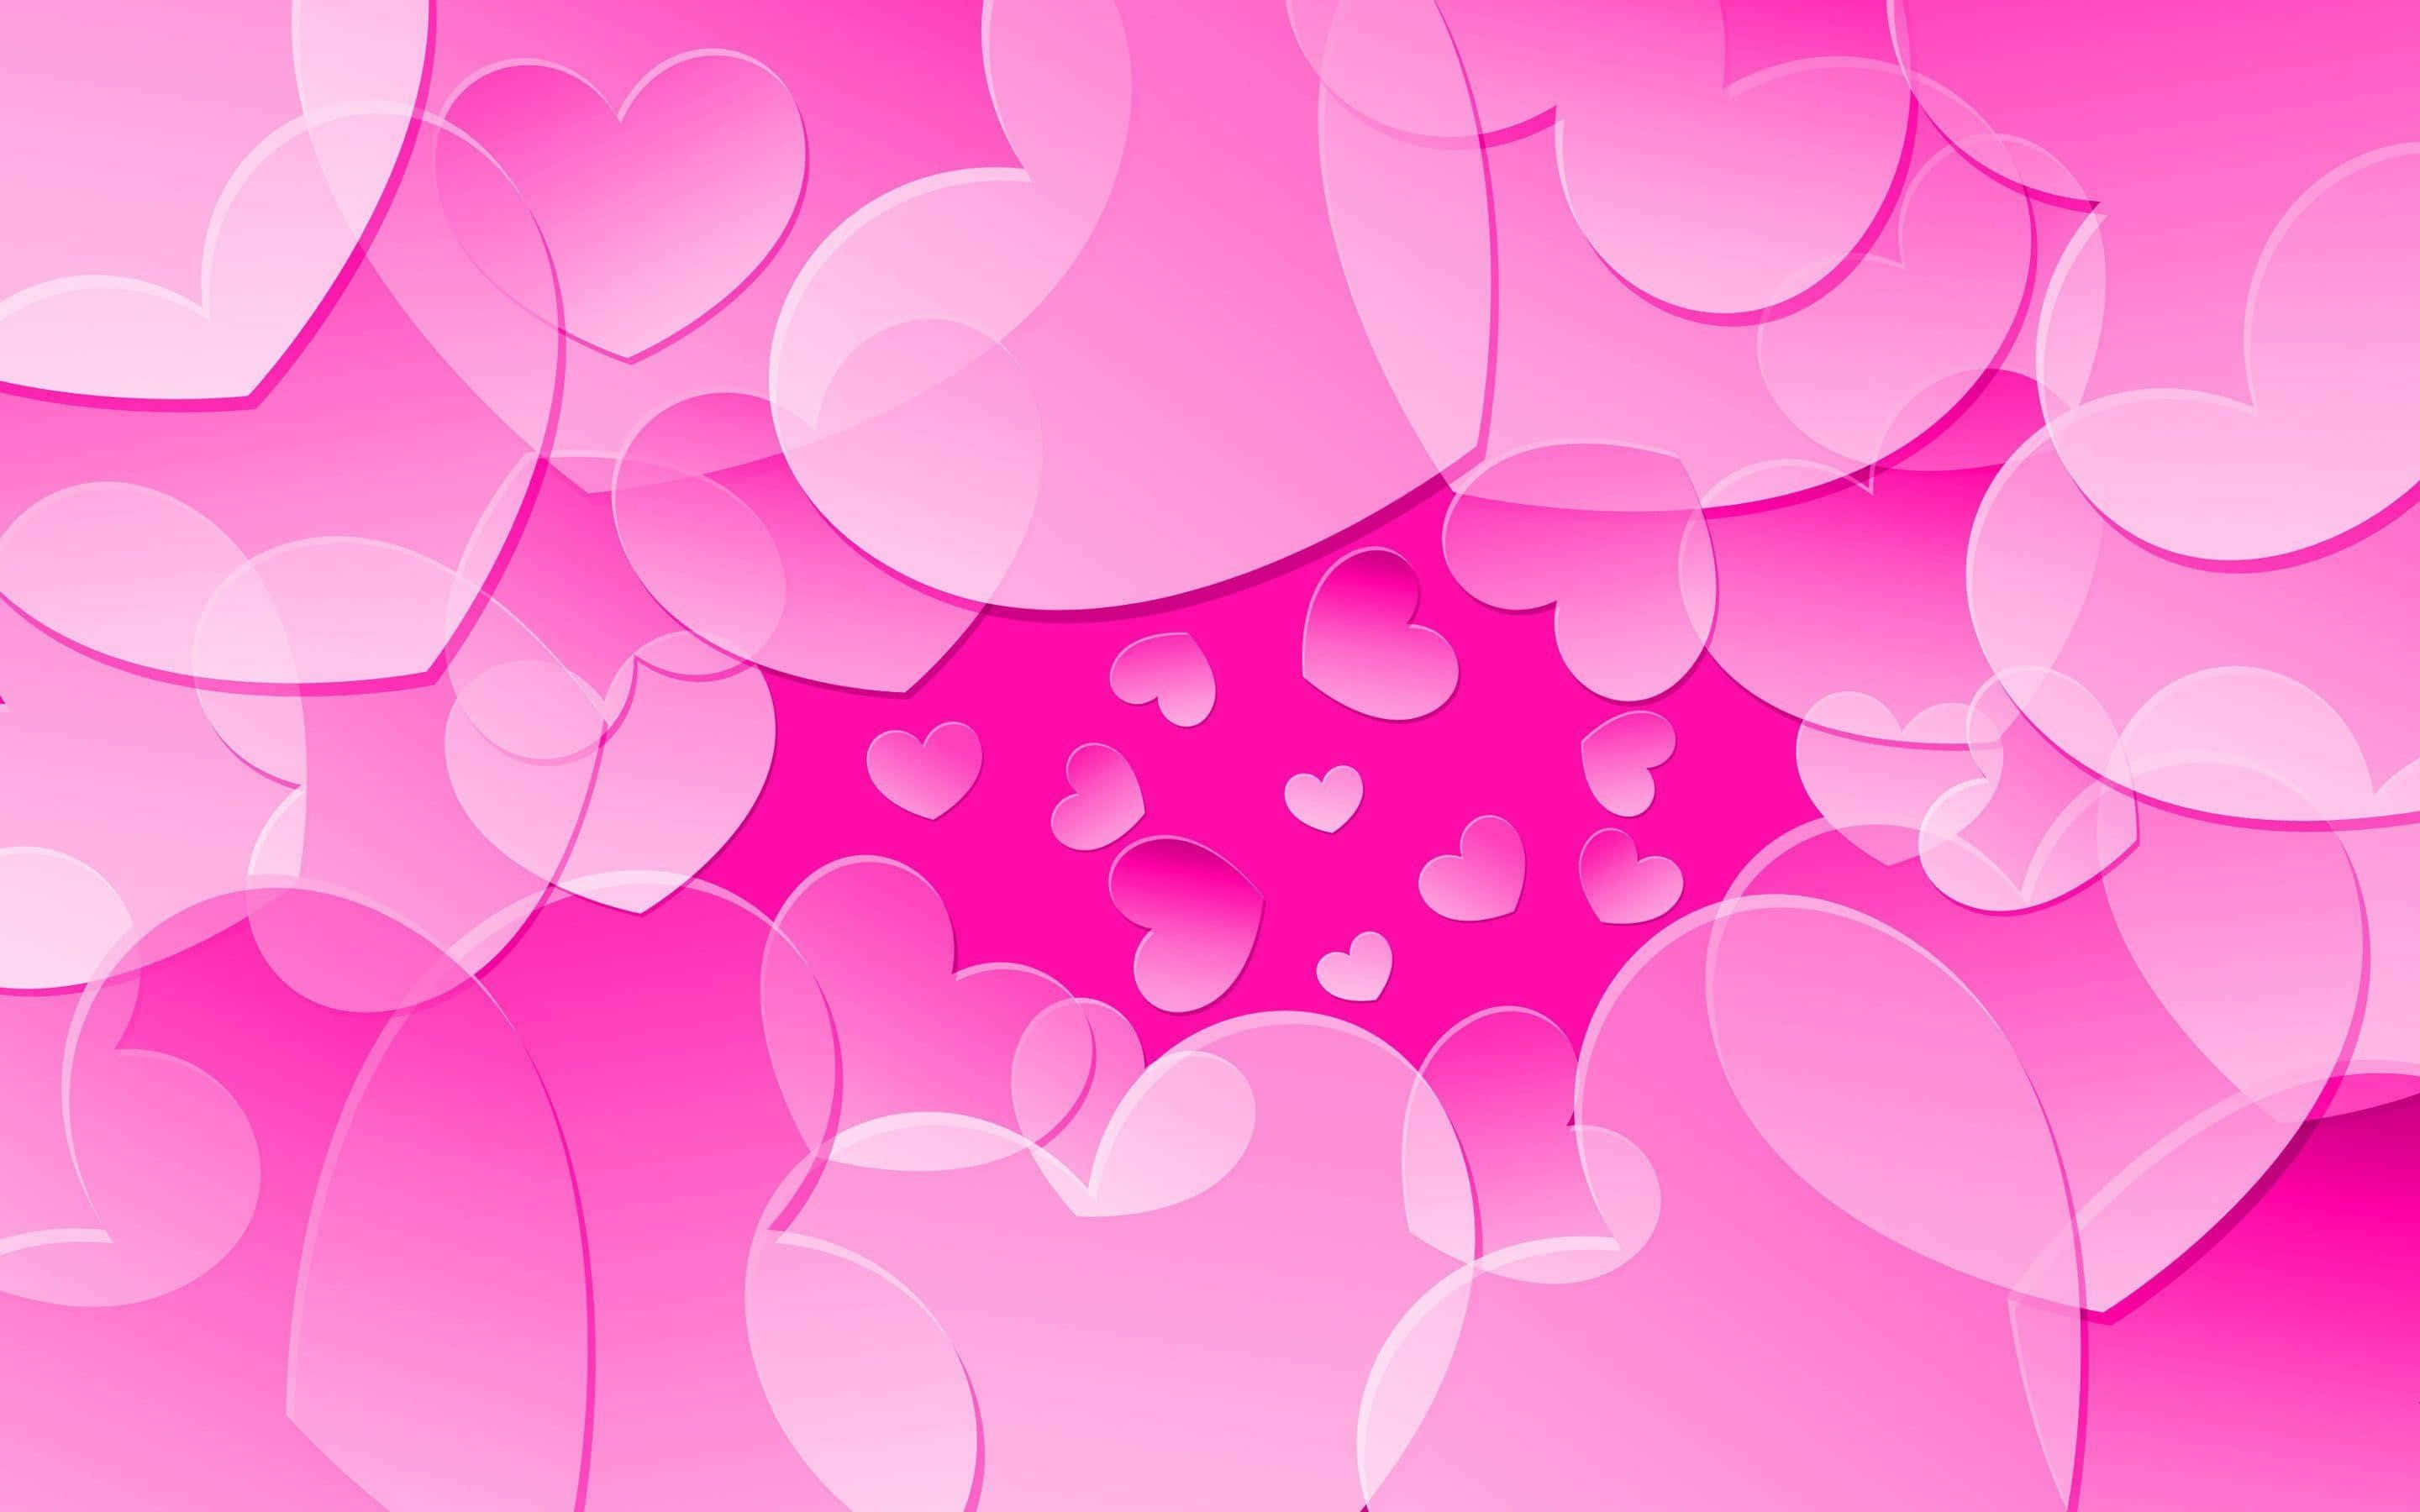 Pink Heart Wallpapers - Light Pink Aesthetic Wallpaper iPhone & Android